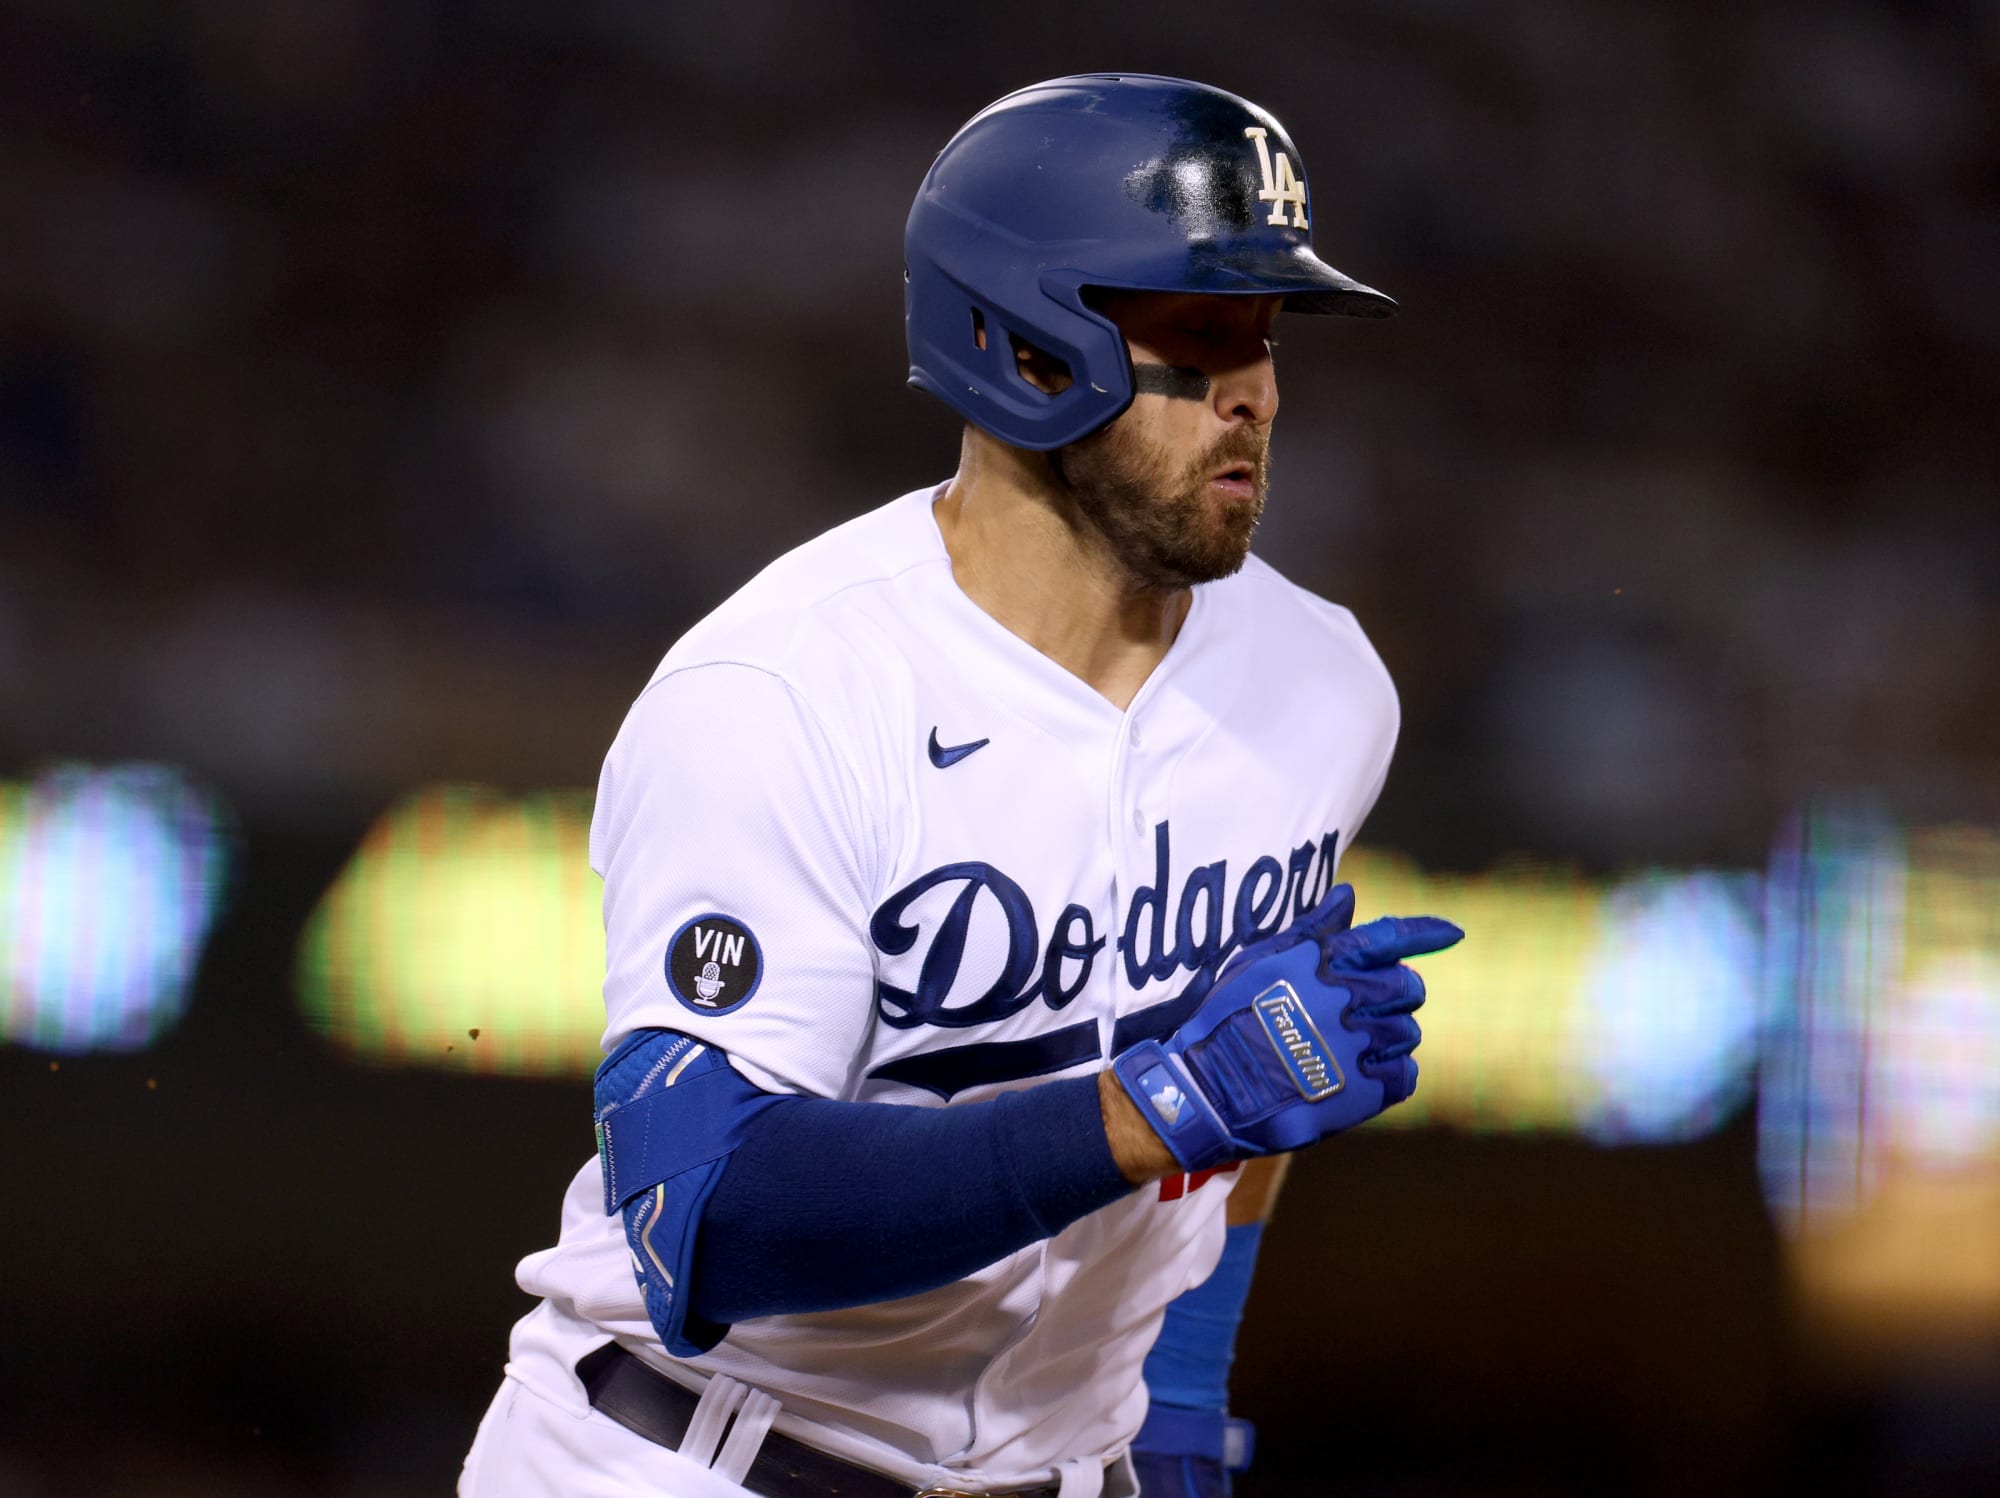 Joey Gallo doesn’t blame Yankees for mechanical issues, wants them in World Series